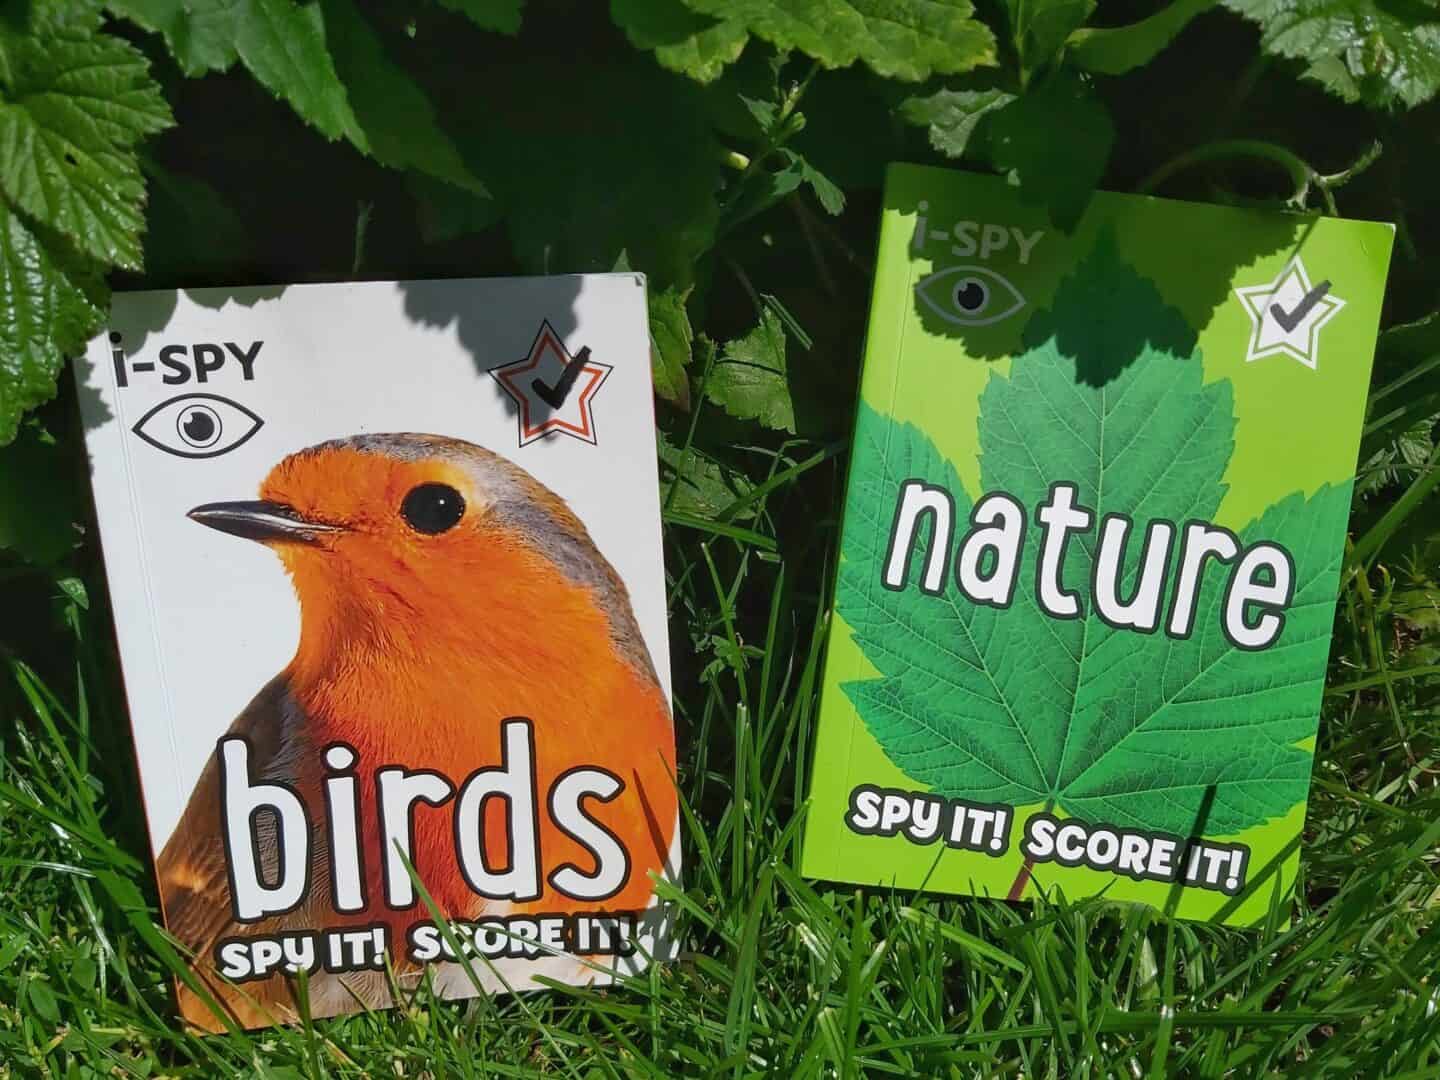 i-spy bird book with a robin on the front and i-spy nature book with a green leaf on the front